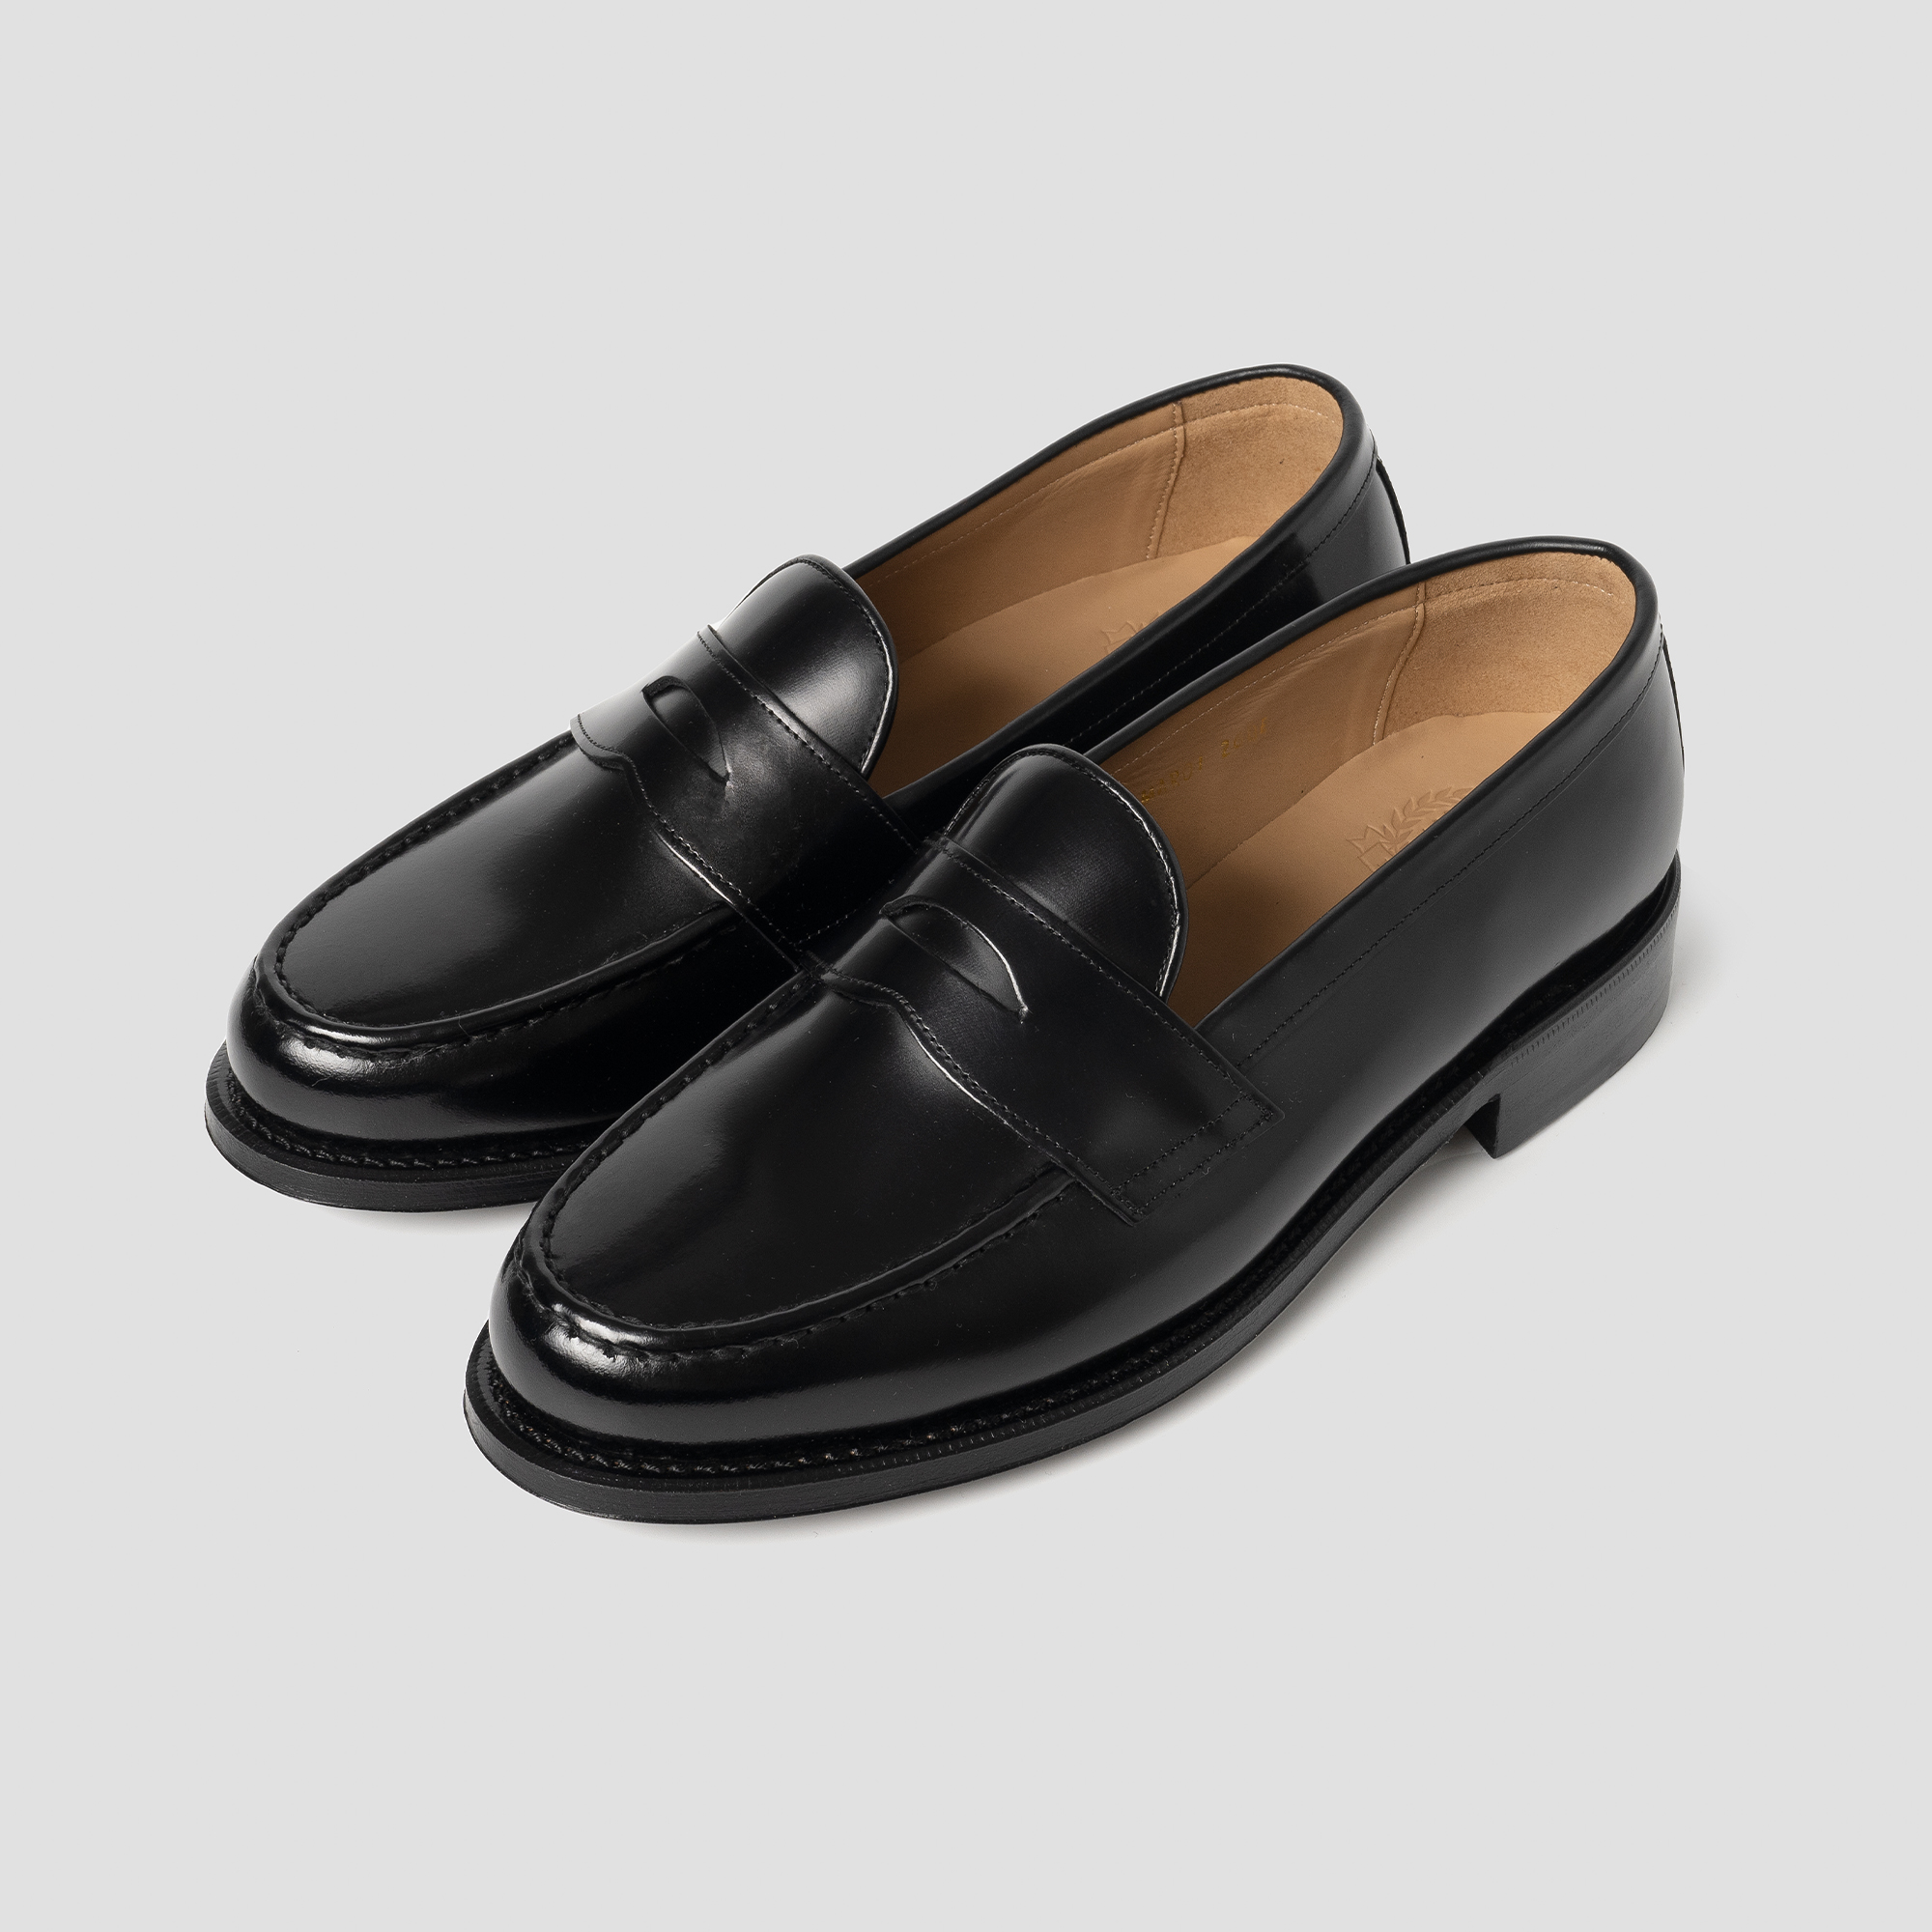 MELAVORO Goodyear Welted Penny Loafer [Black]